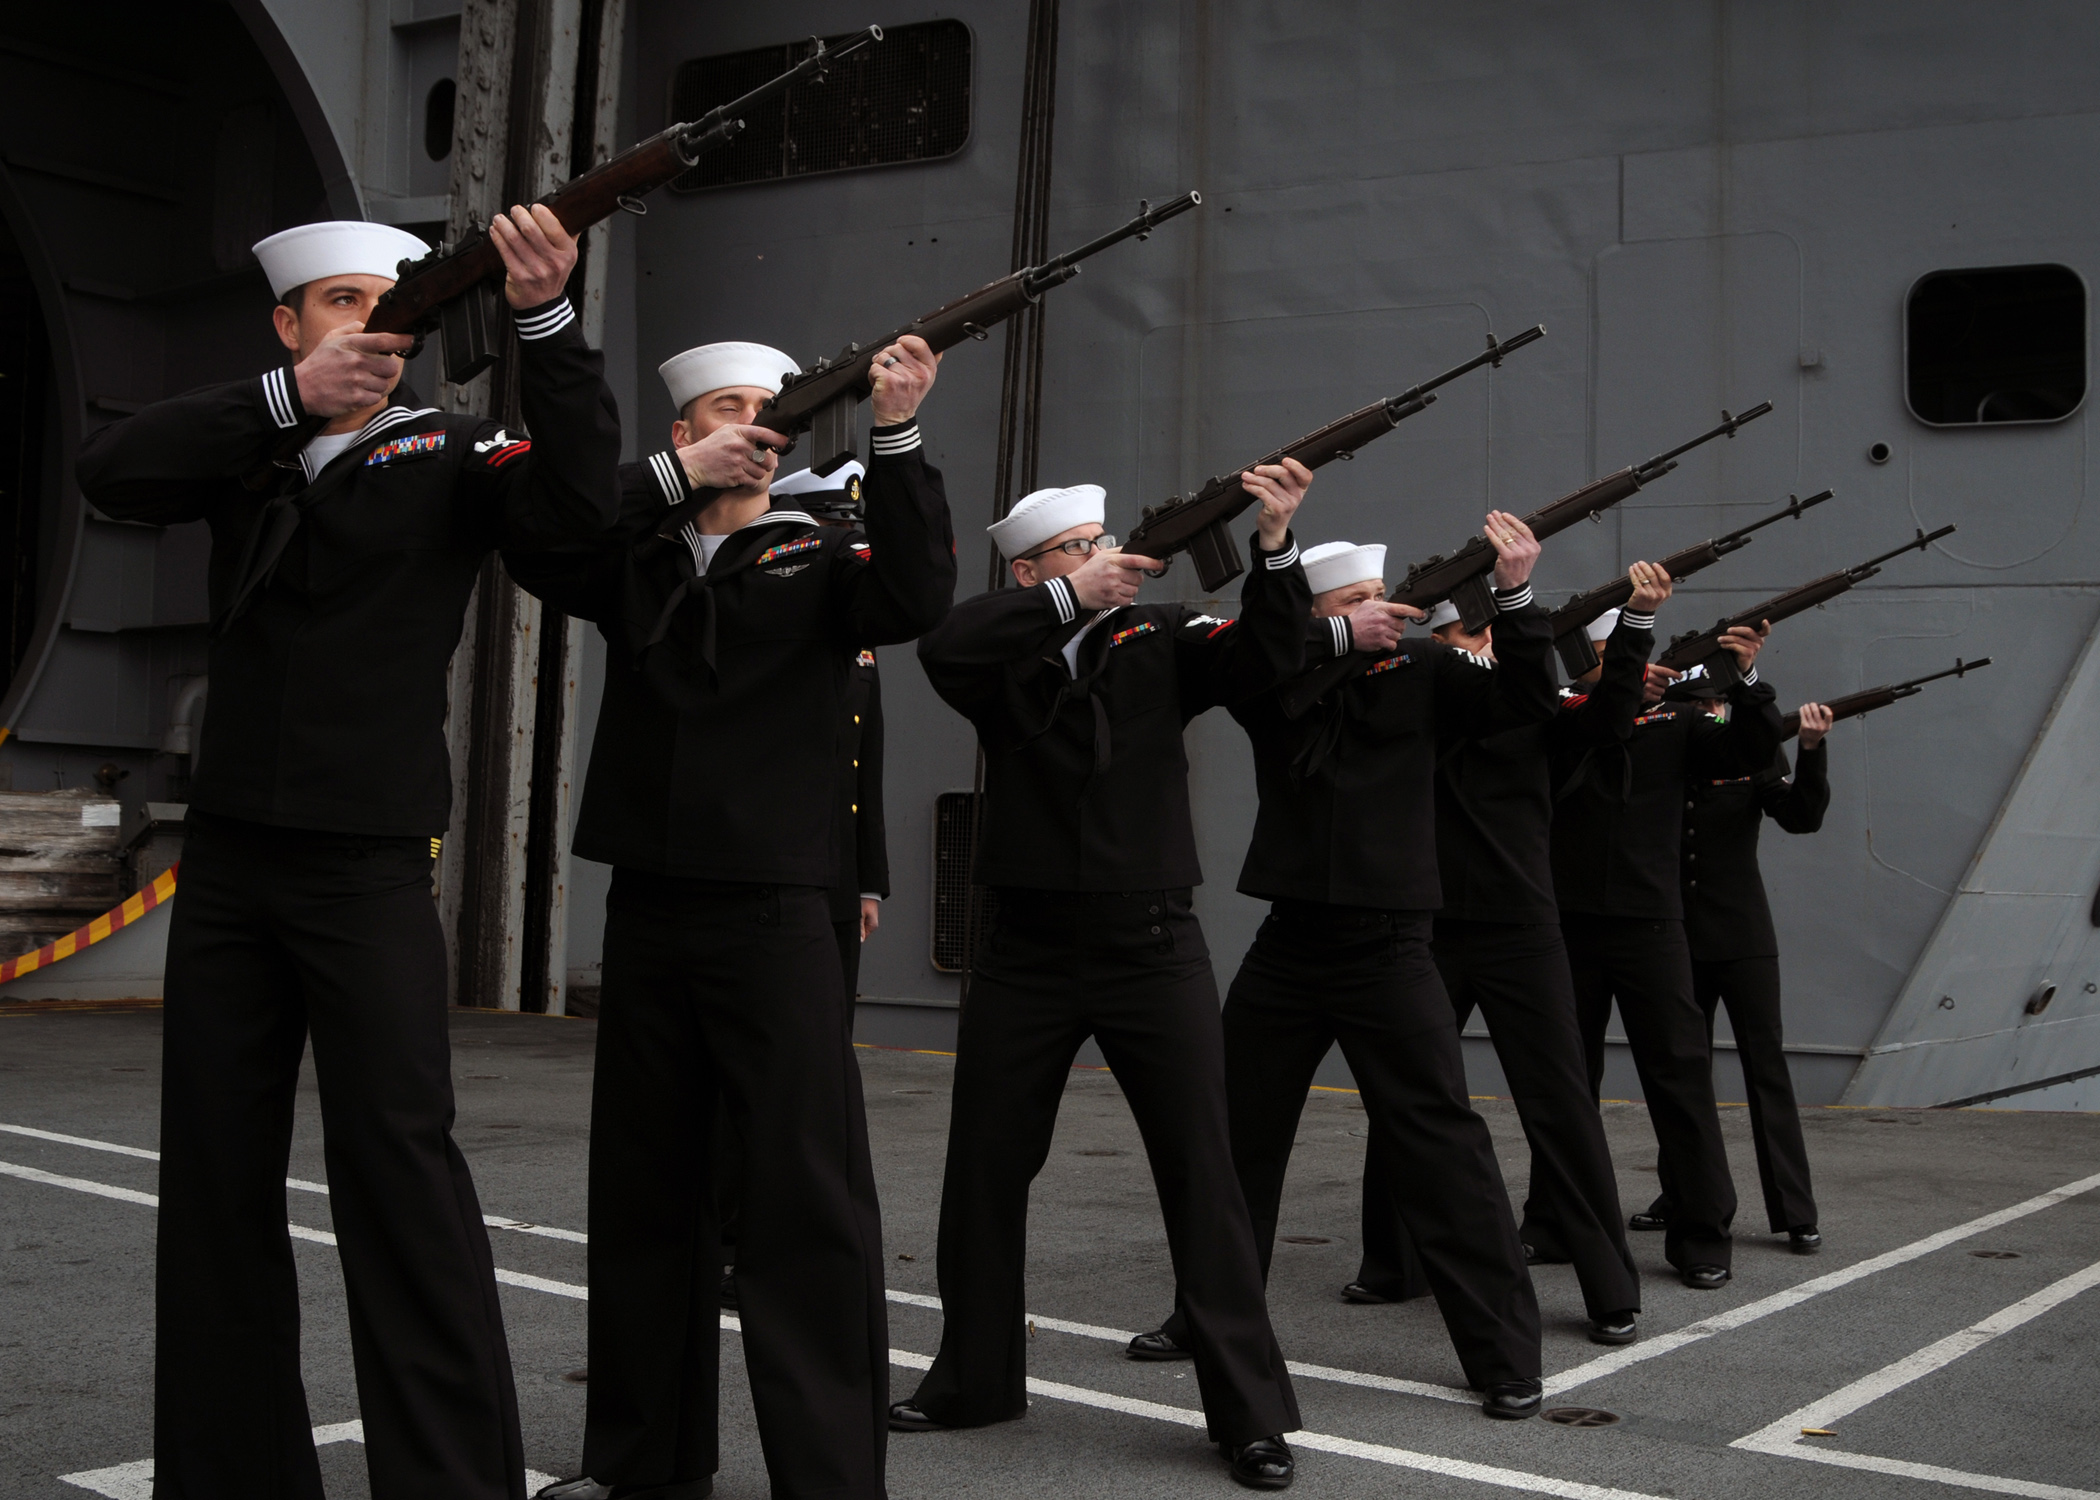 Guns used for 21-gun salute set to retire this year - The last